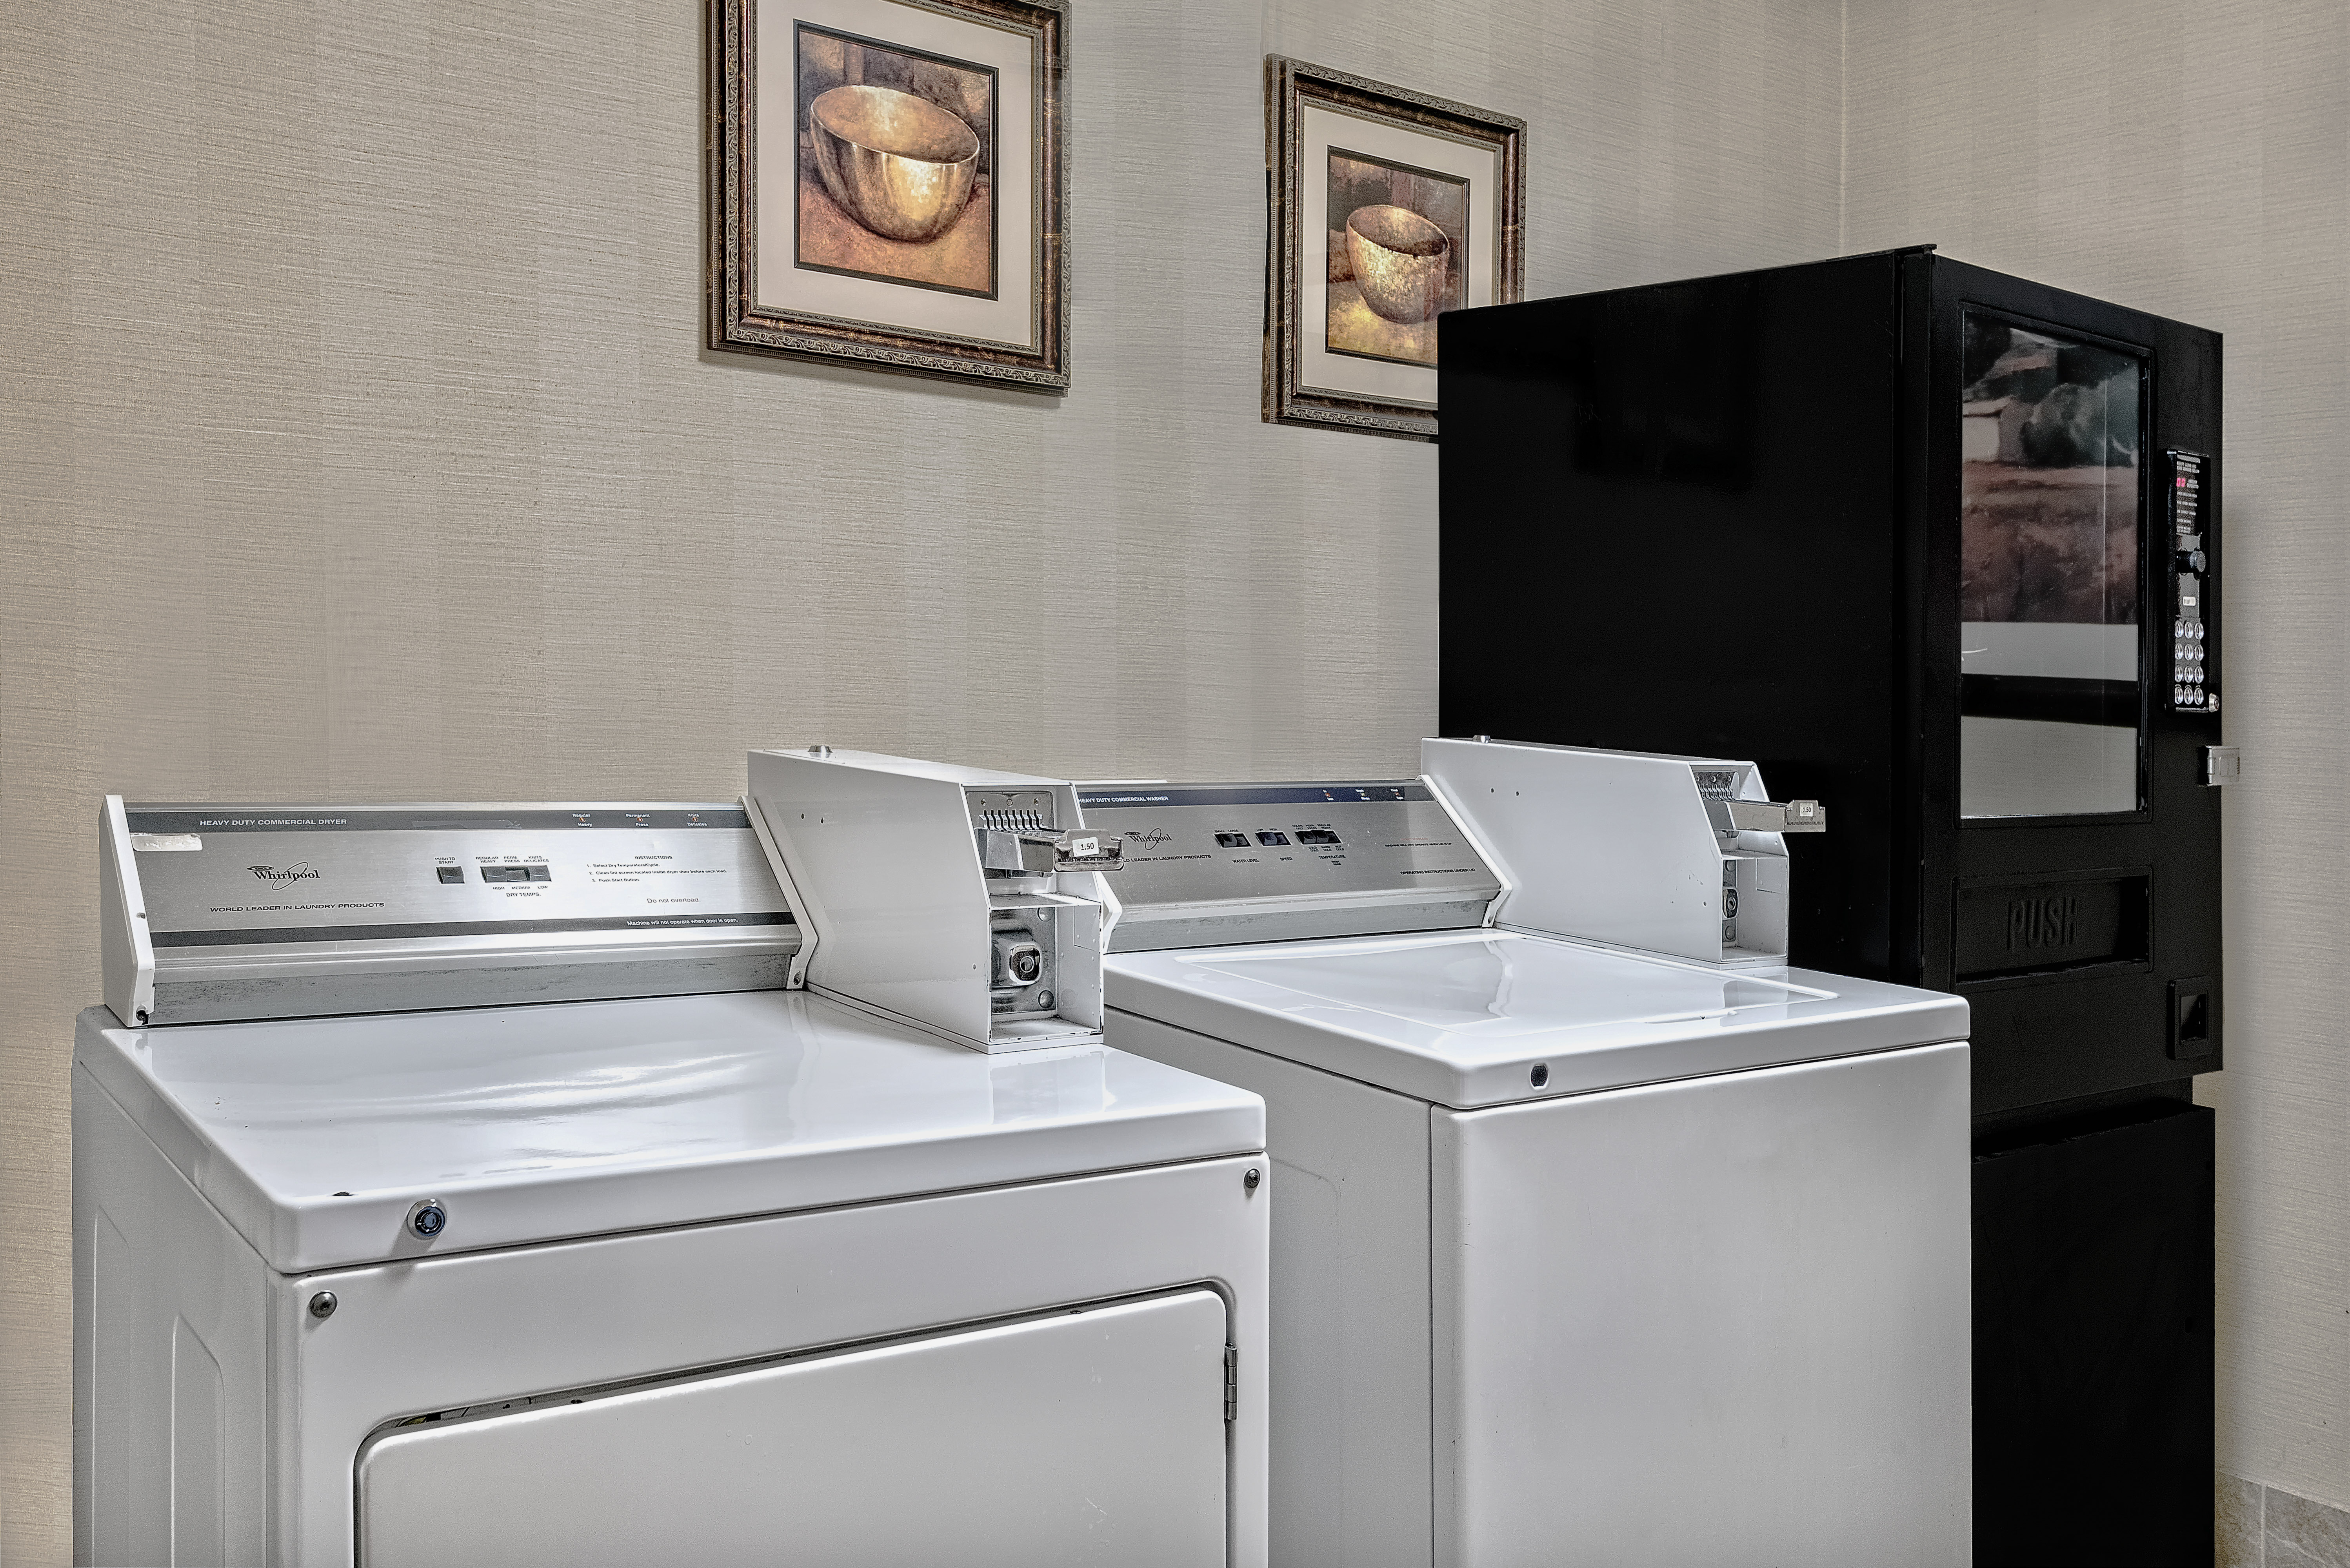 Laundry Machines for Guest Use